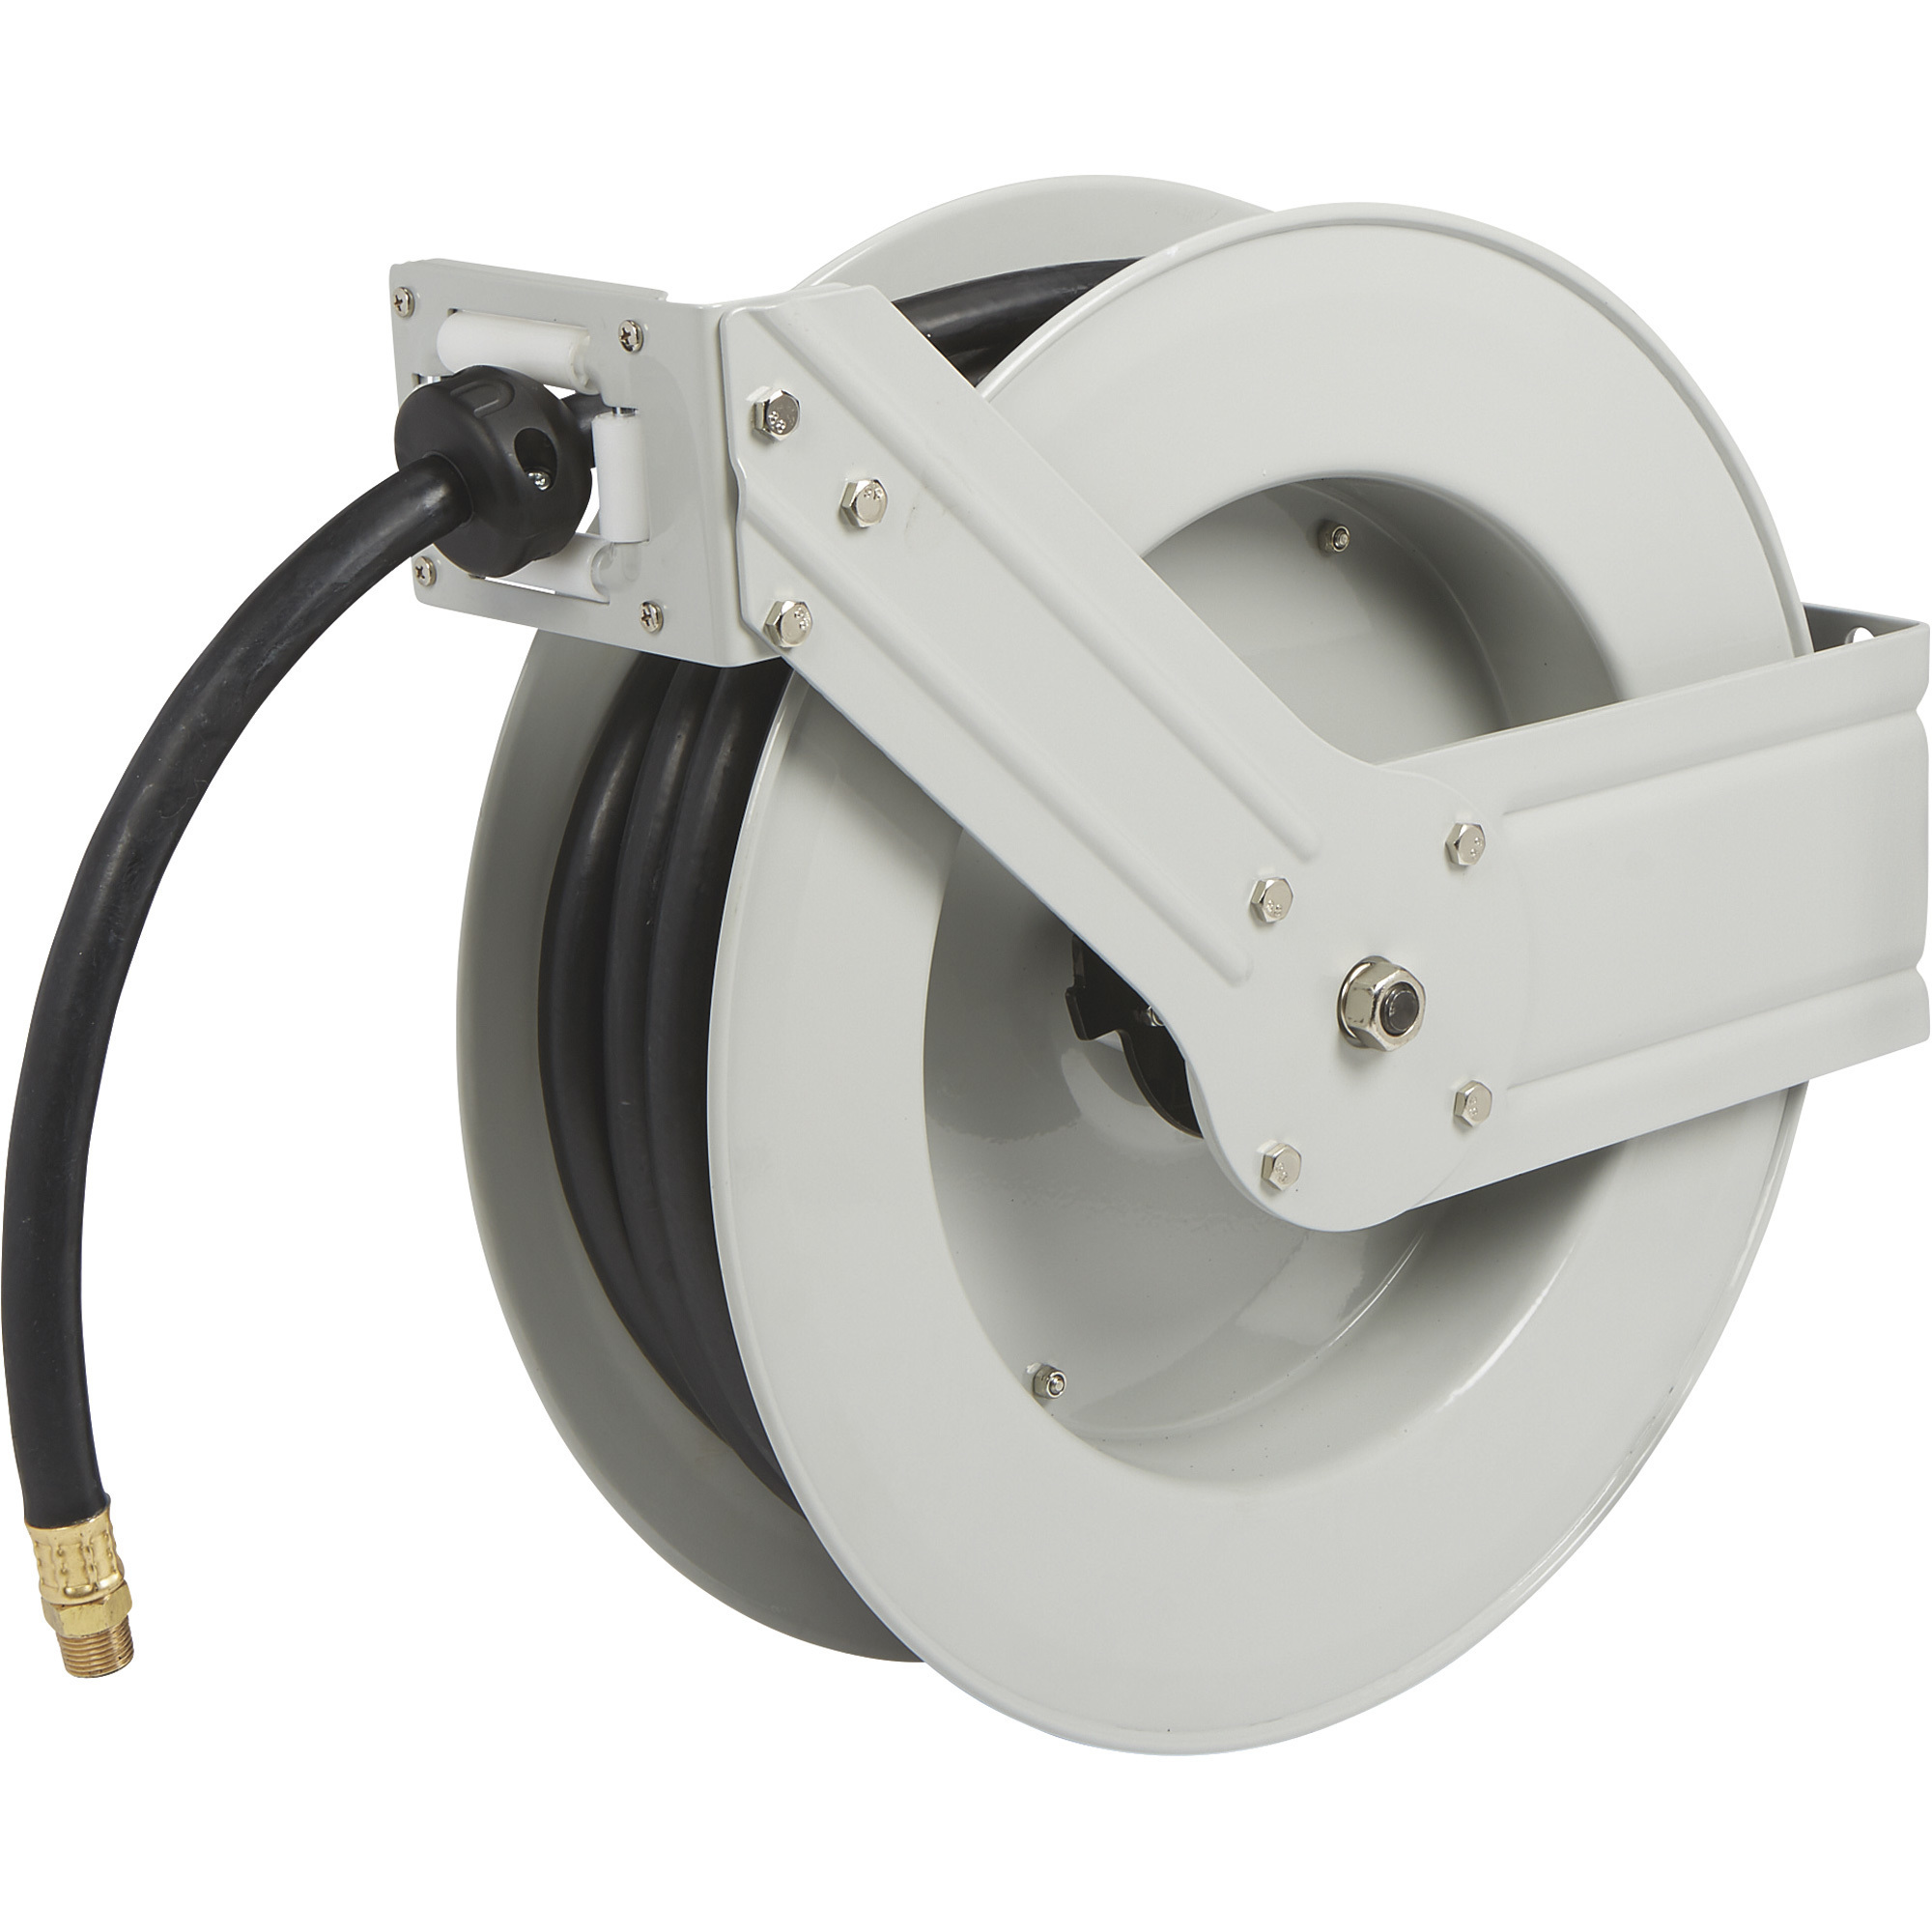 Klutch Heavy-Duty Auto Rewind Air Hose Reel, With 1/2in. x 50ft. Rubber  Hose, Max. 300 PSI